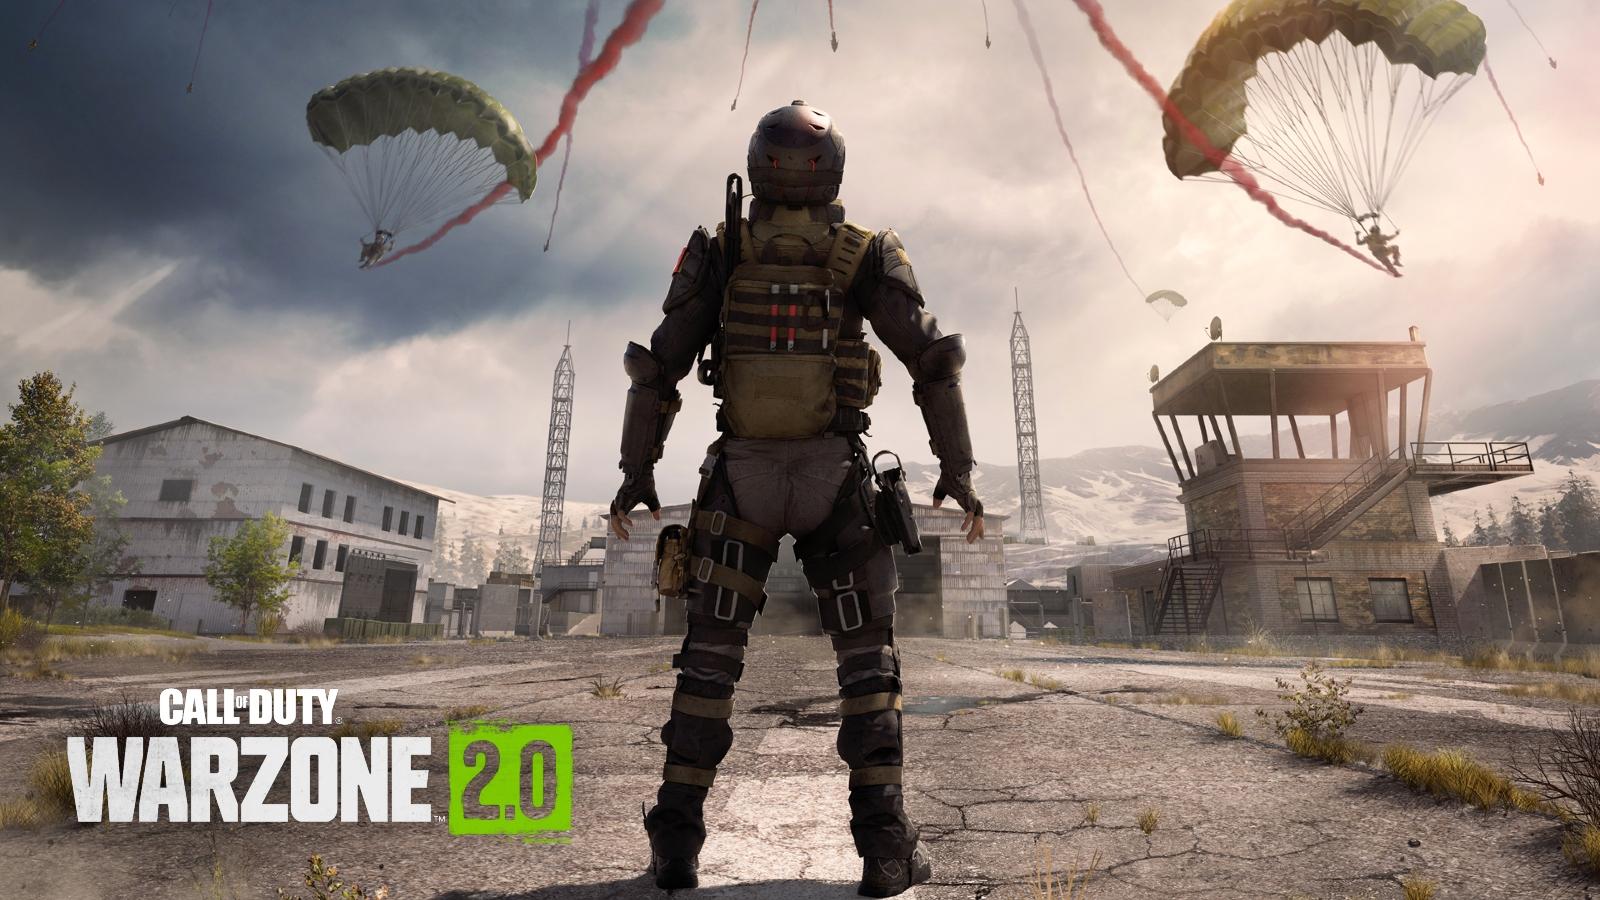 Warzone 2 art with operator watching players parachuting in, with Warzone 2 logo in corner